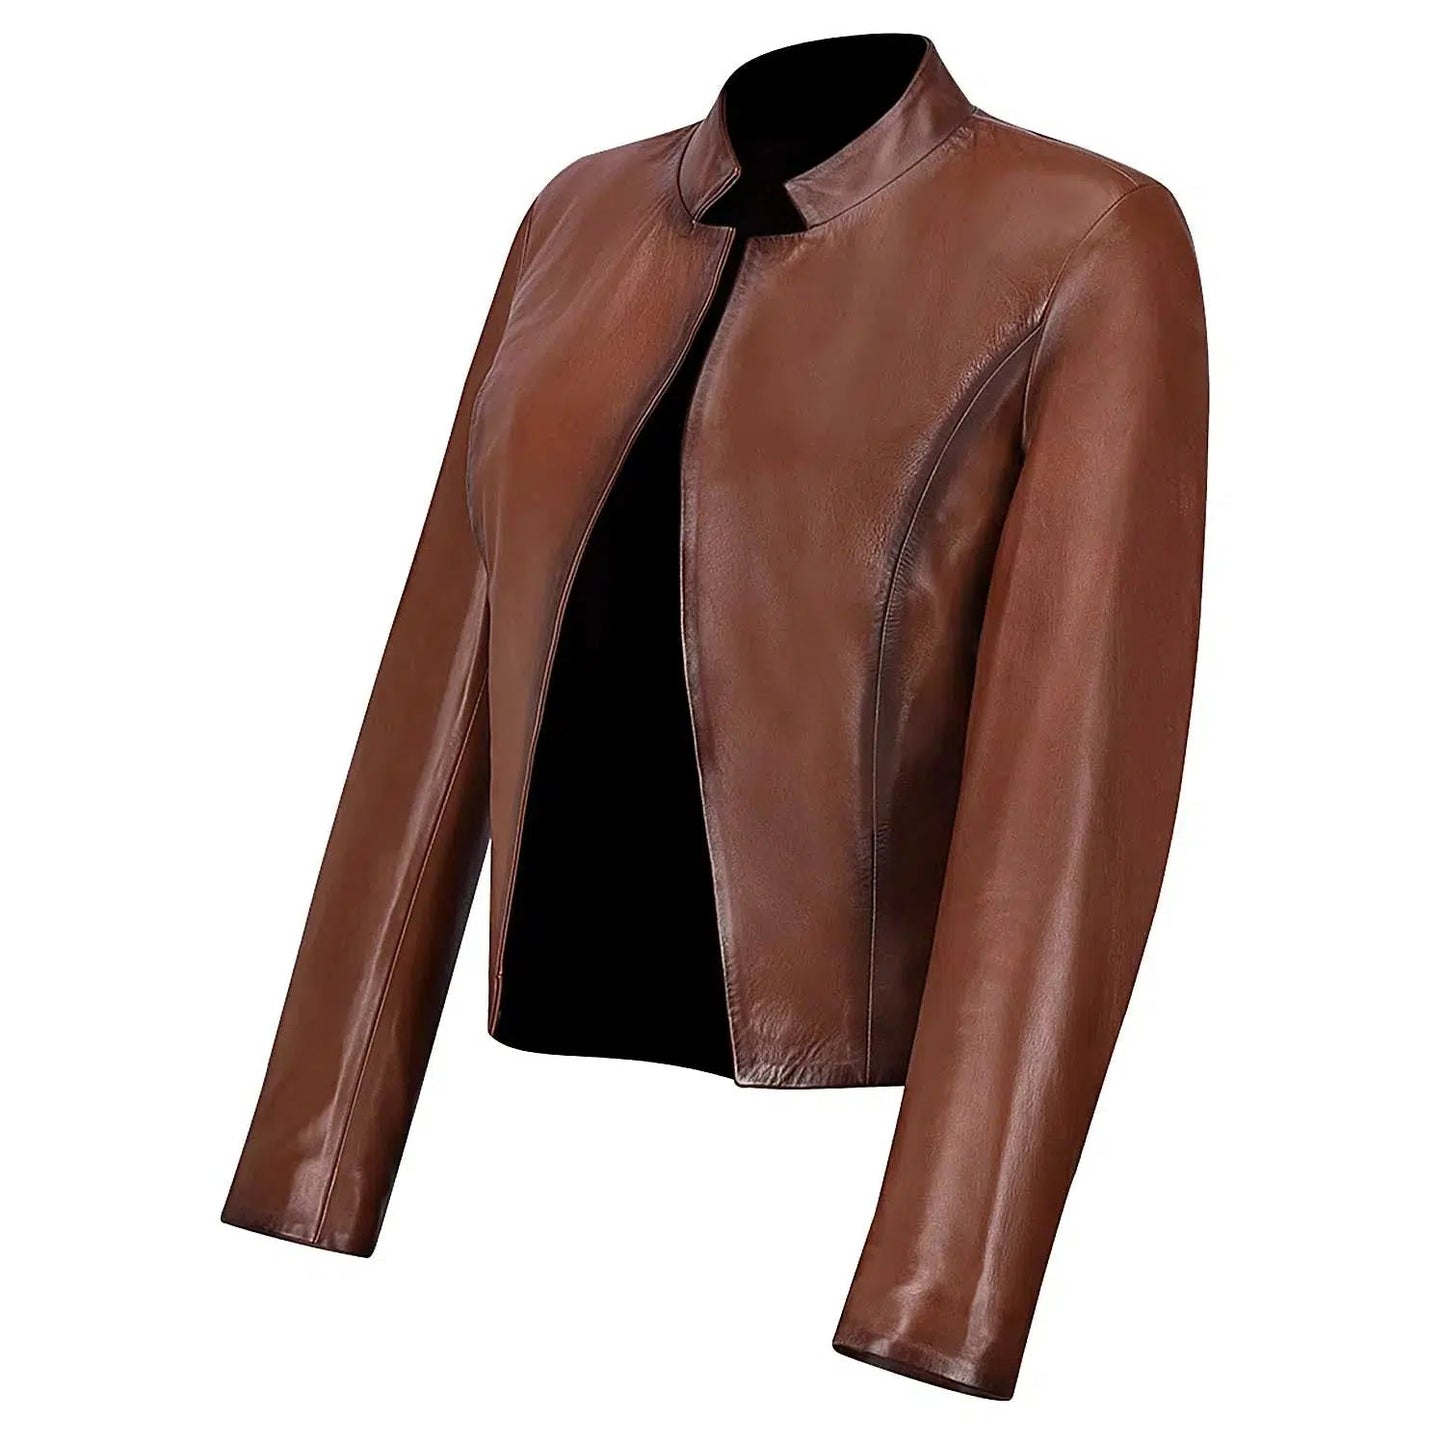 M280COC - Cuadra brown dress casual fashion leather jacket for women-Kuet.us